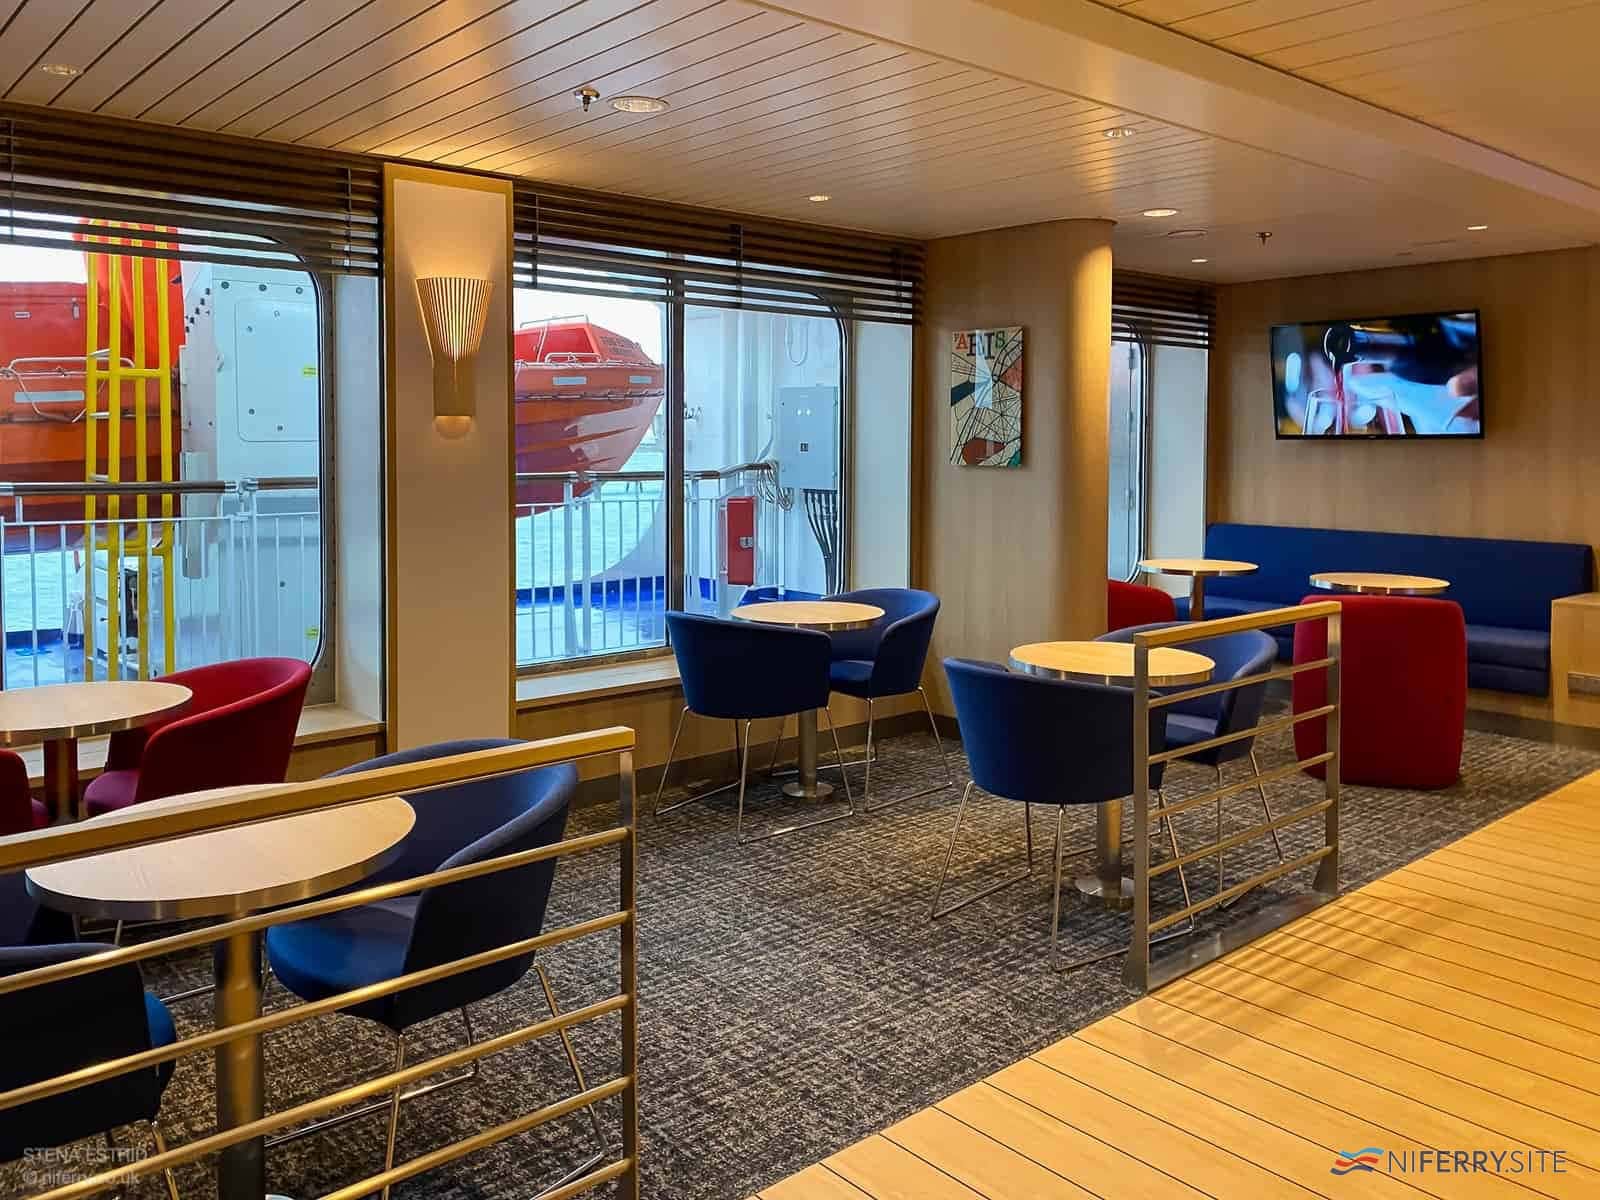 Seating area across the corridor from the 'Outlet'. © NIFerry.